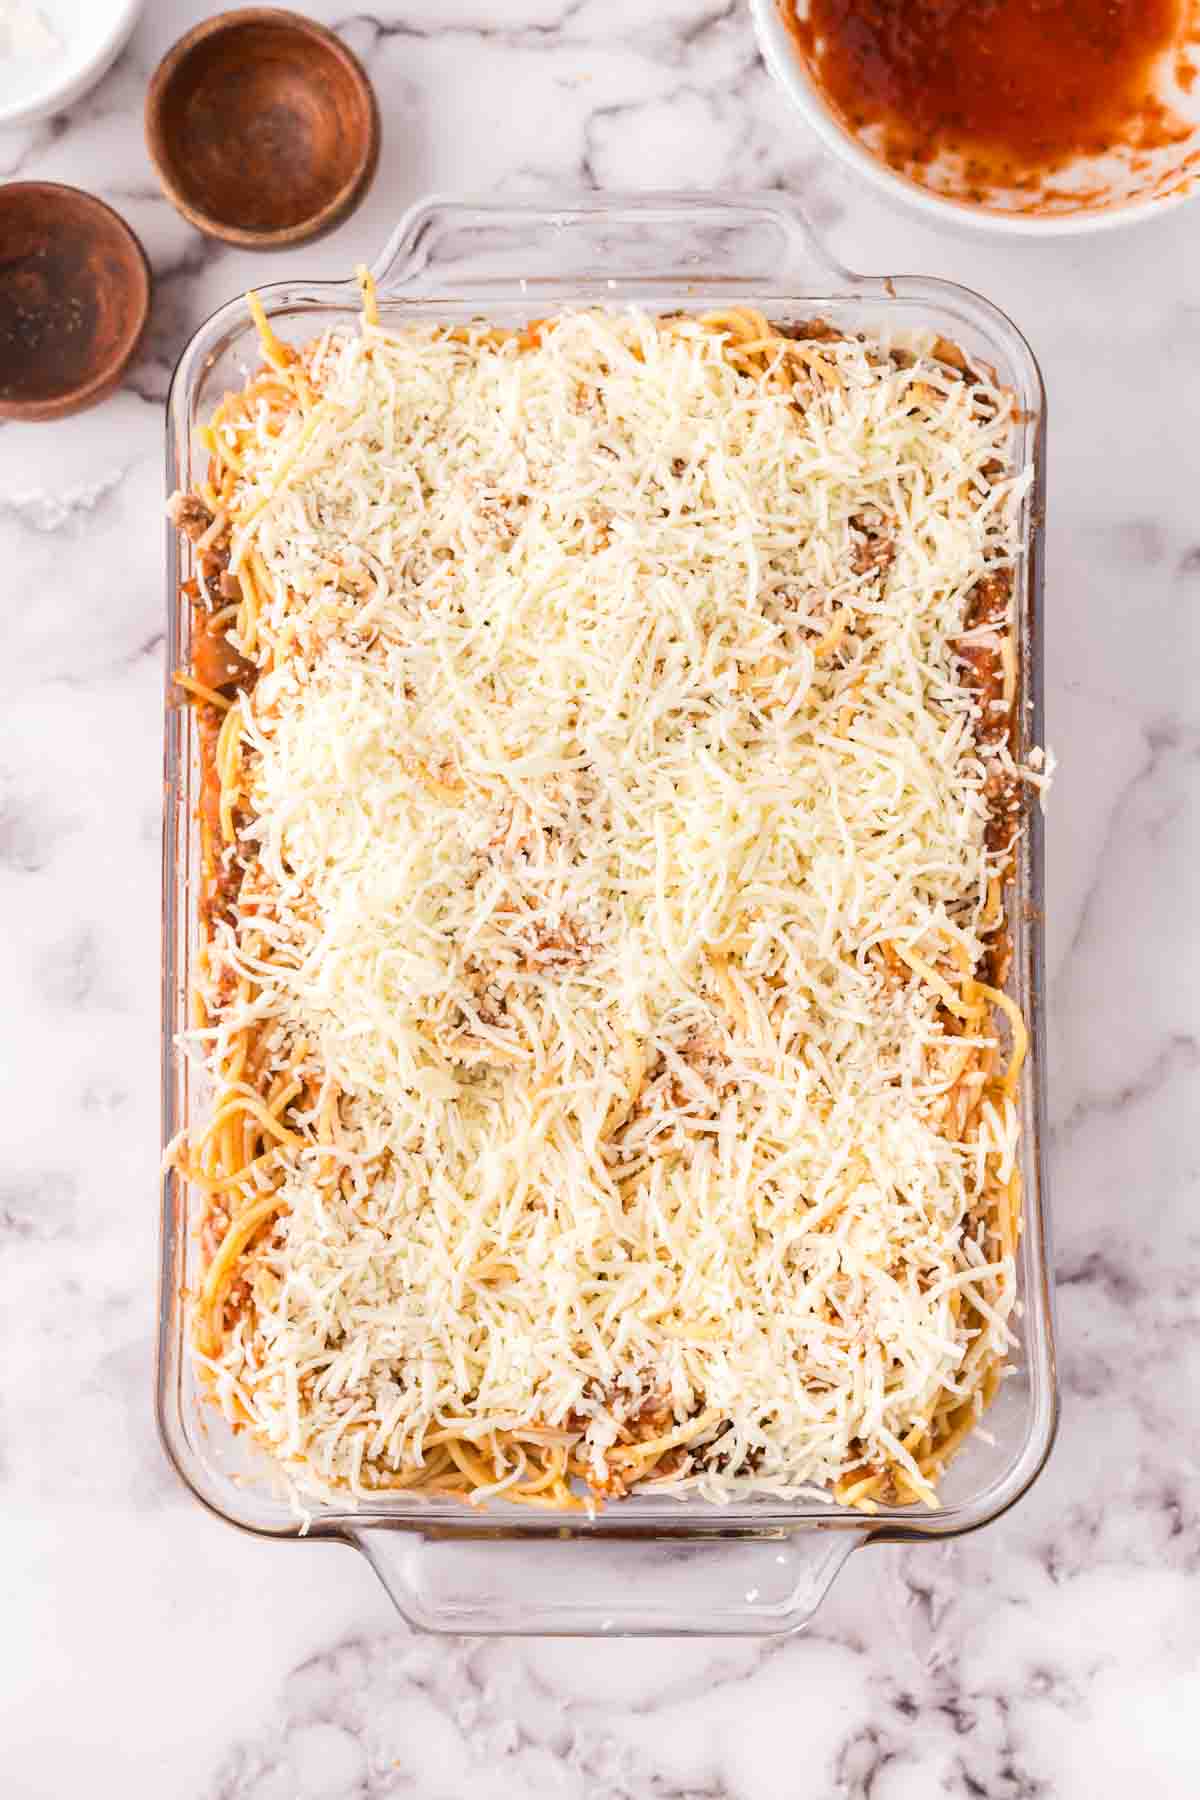 Assembling the baked spaghetti in a 9x13 with sprinkled cheese on top.